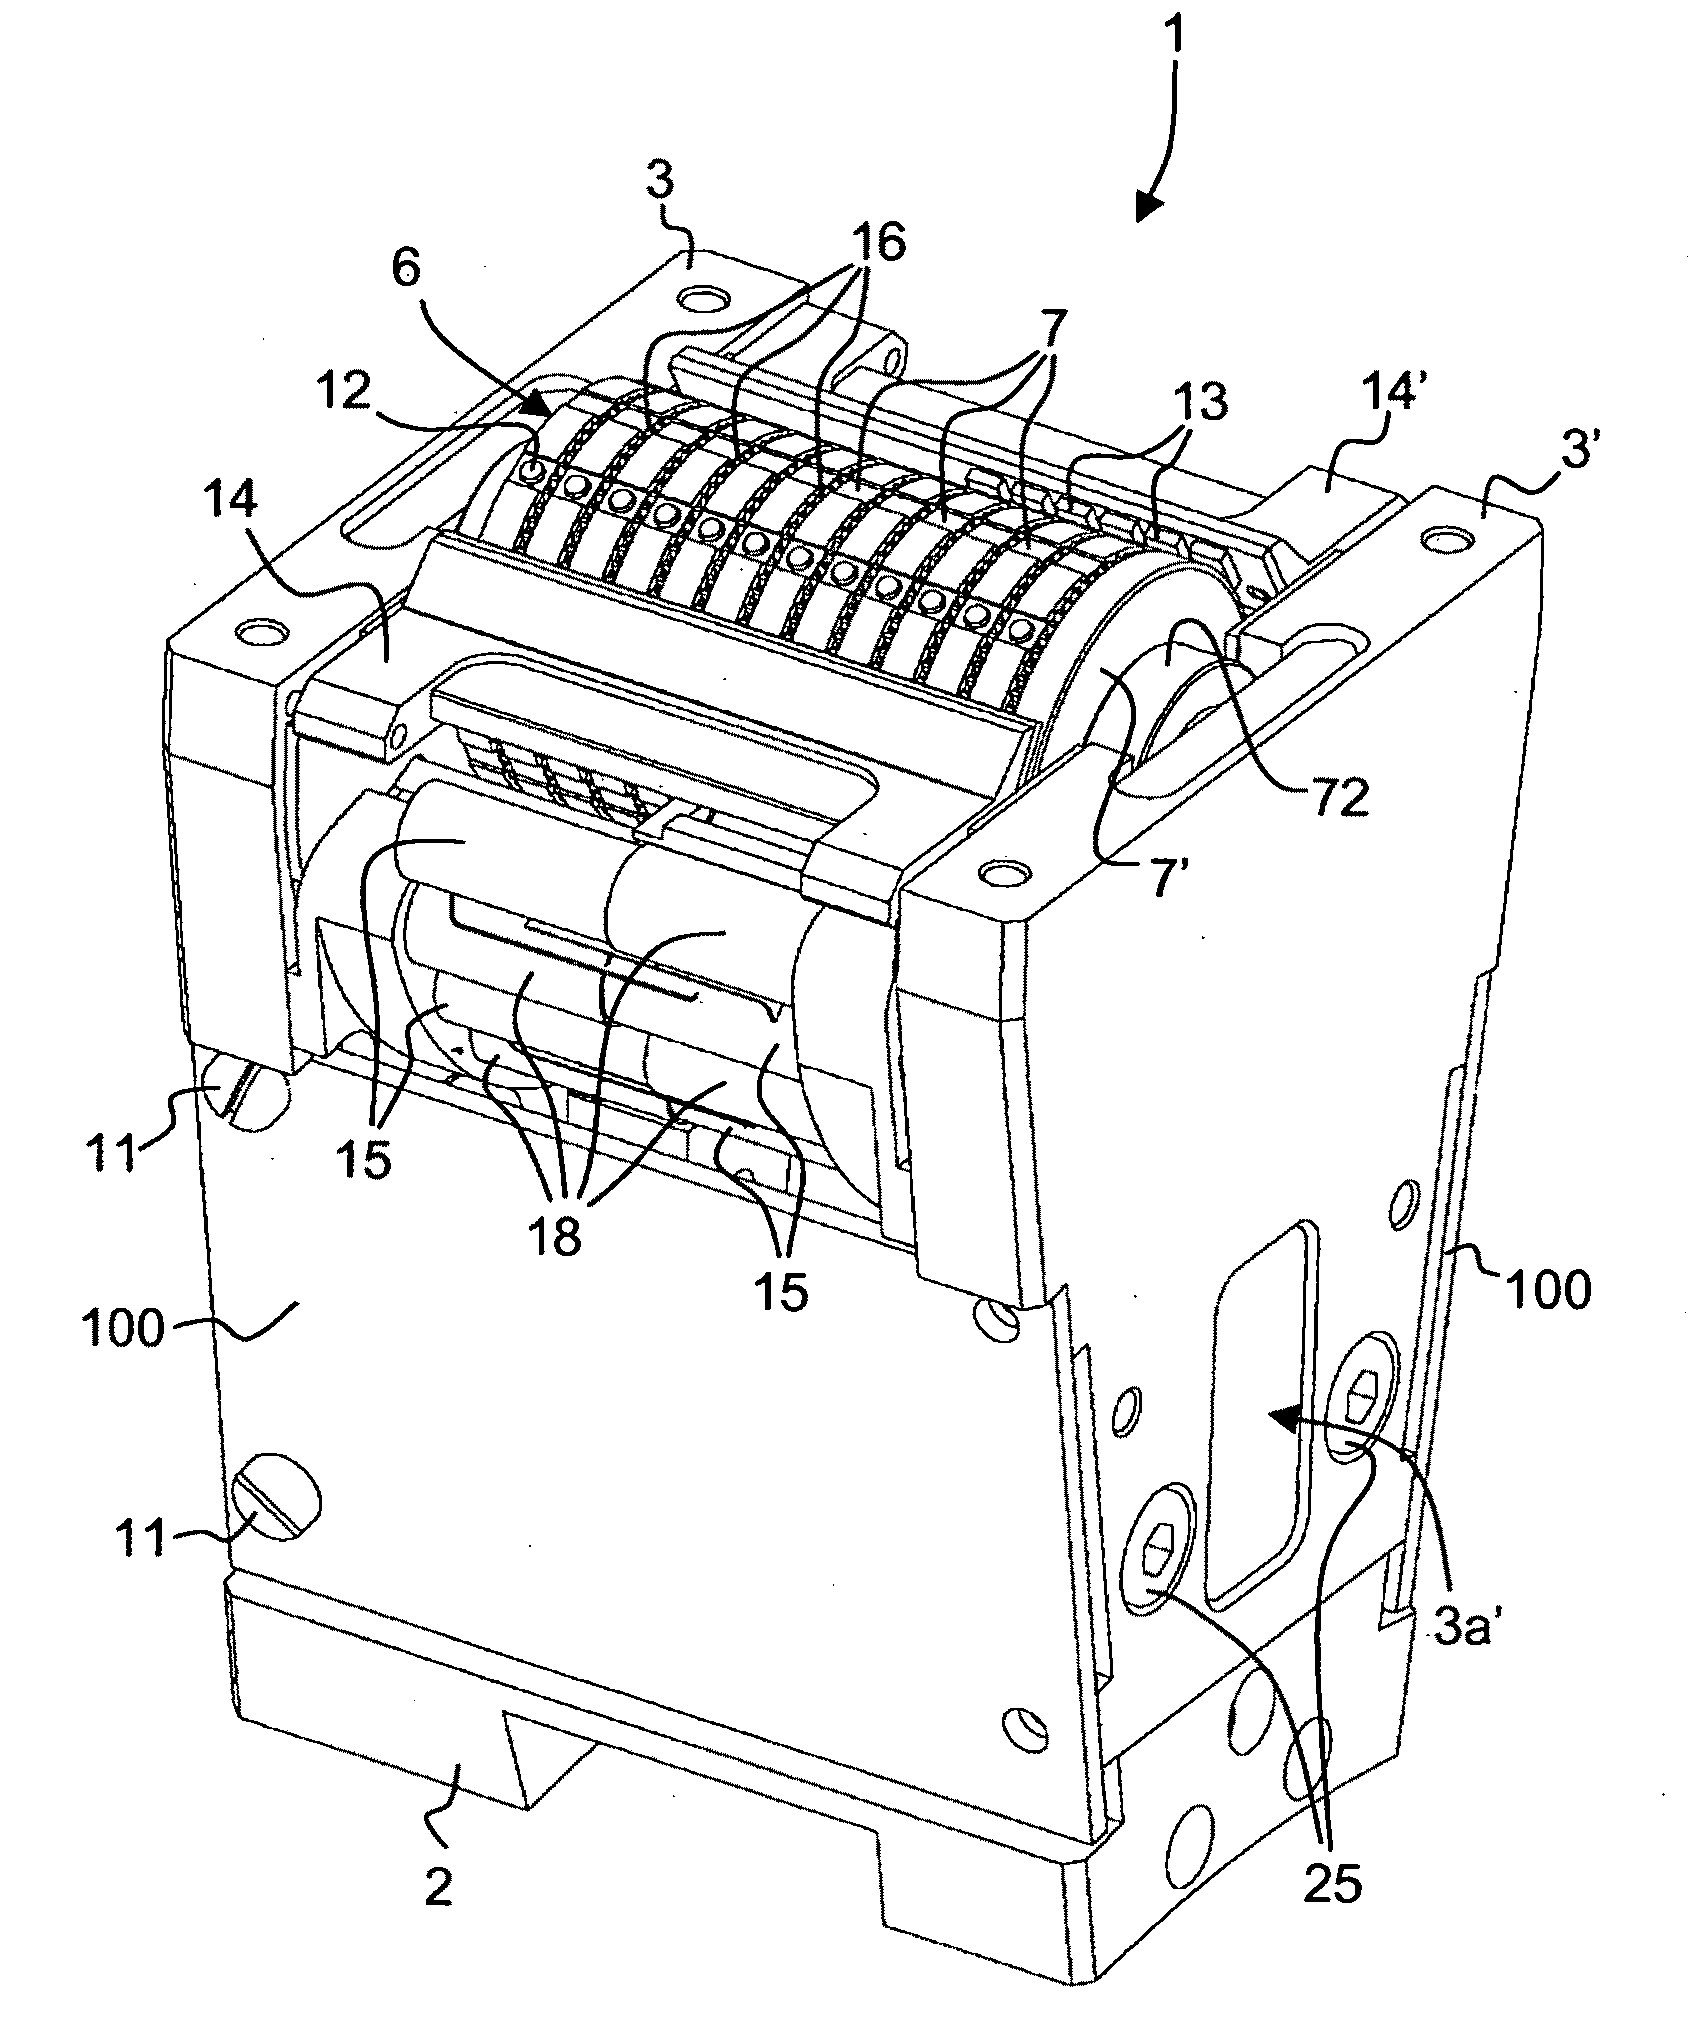 Method and device for controlling the position of the numbering wheels of a numbering device